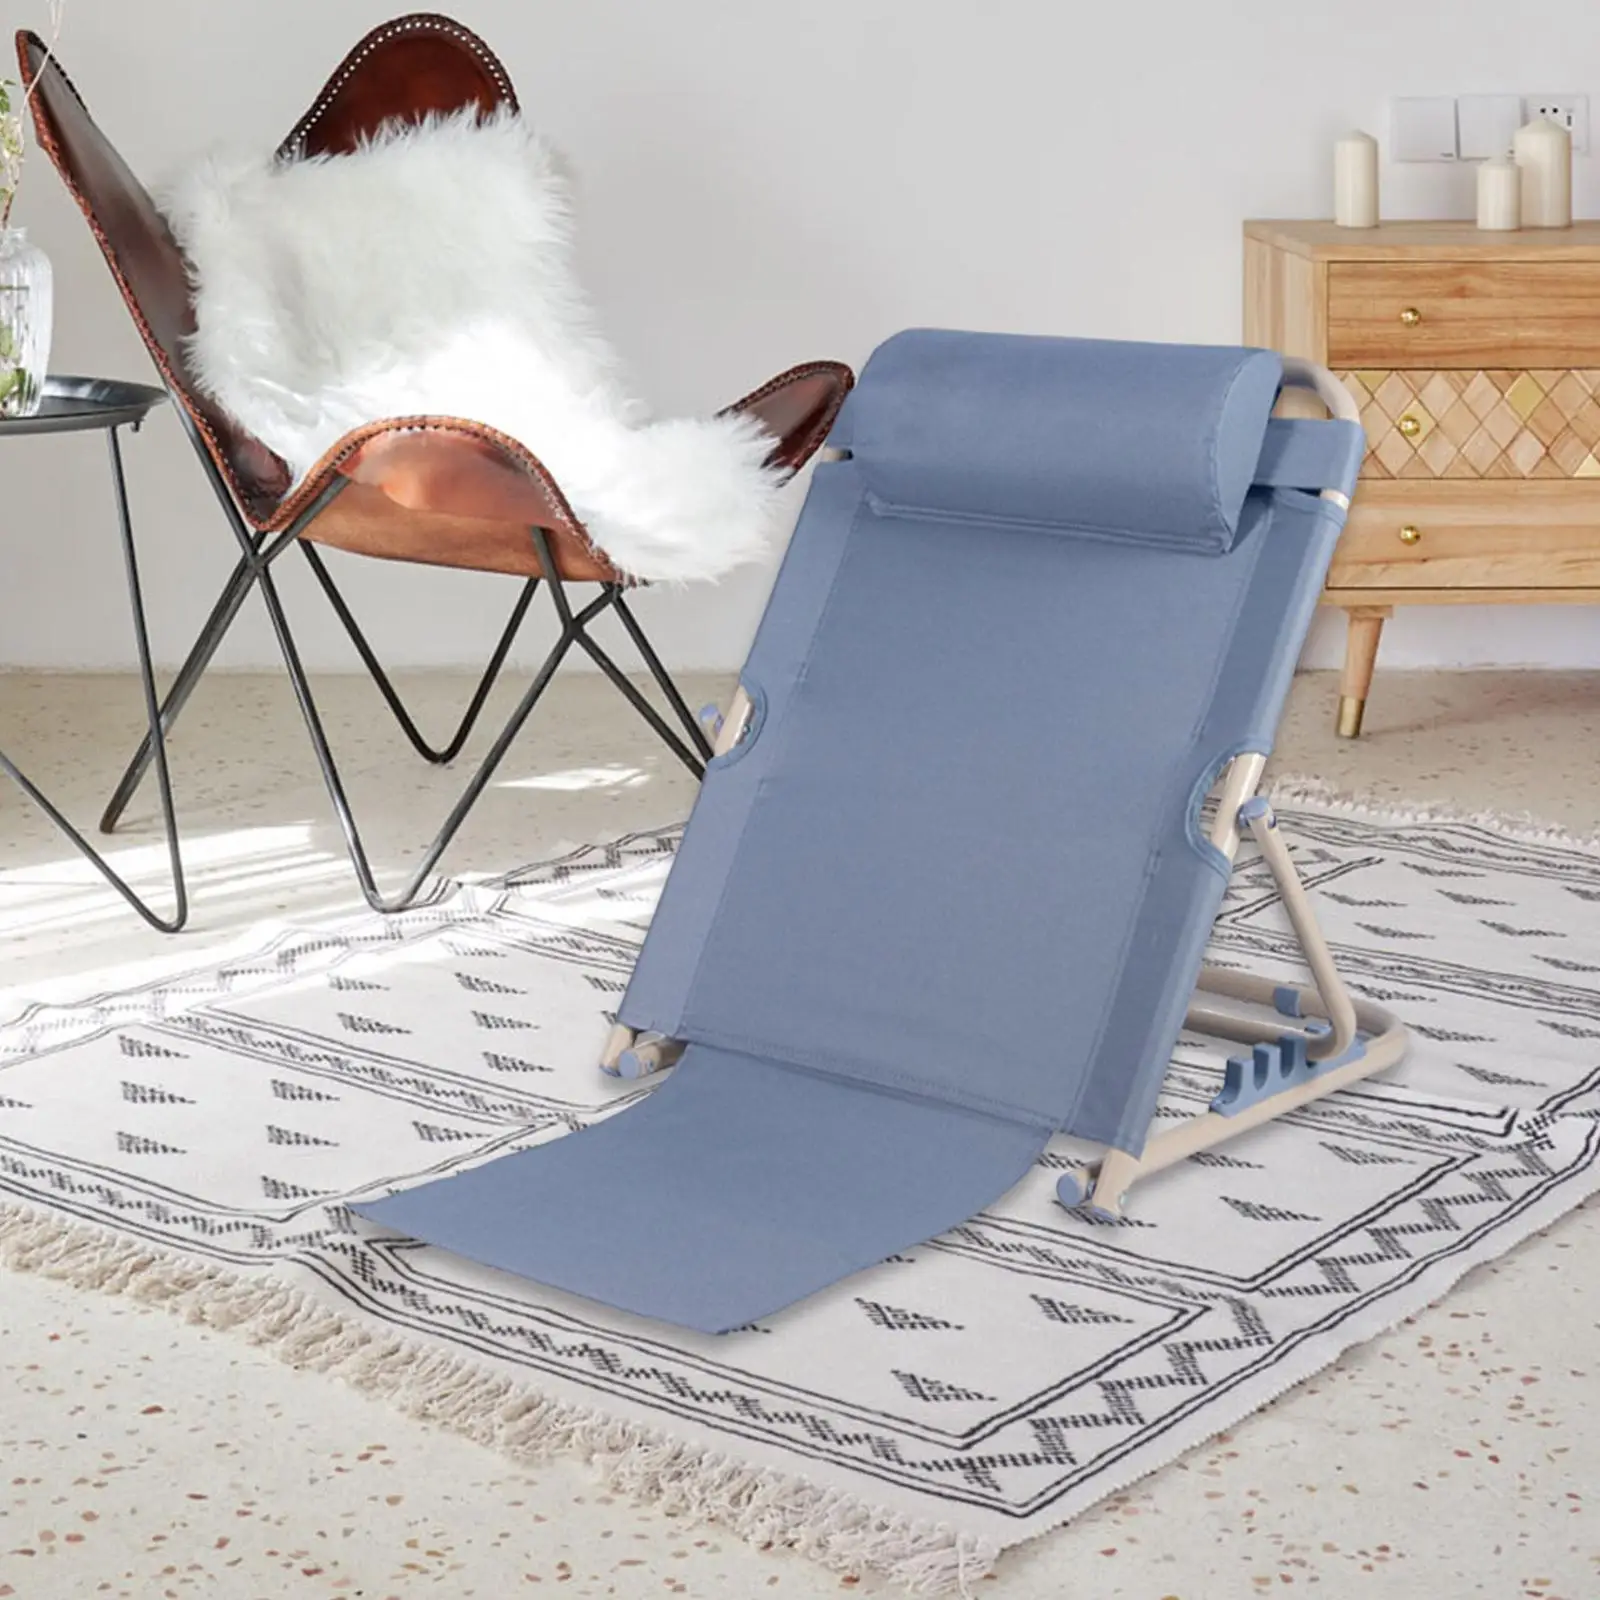 Sit up Back Rest Folding Chair Adjustable with Head Cushion Multi Function Portable Support Bed Backrest for Head Neck